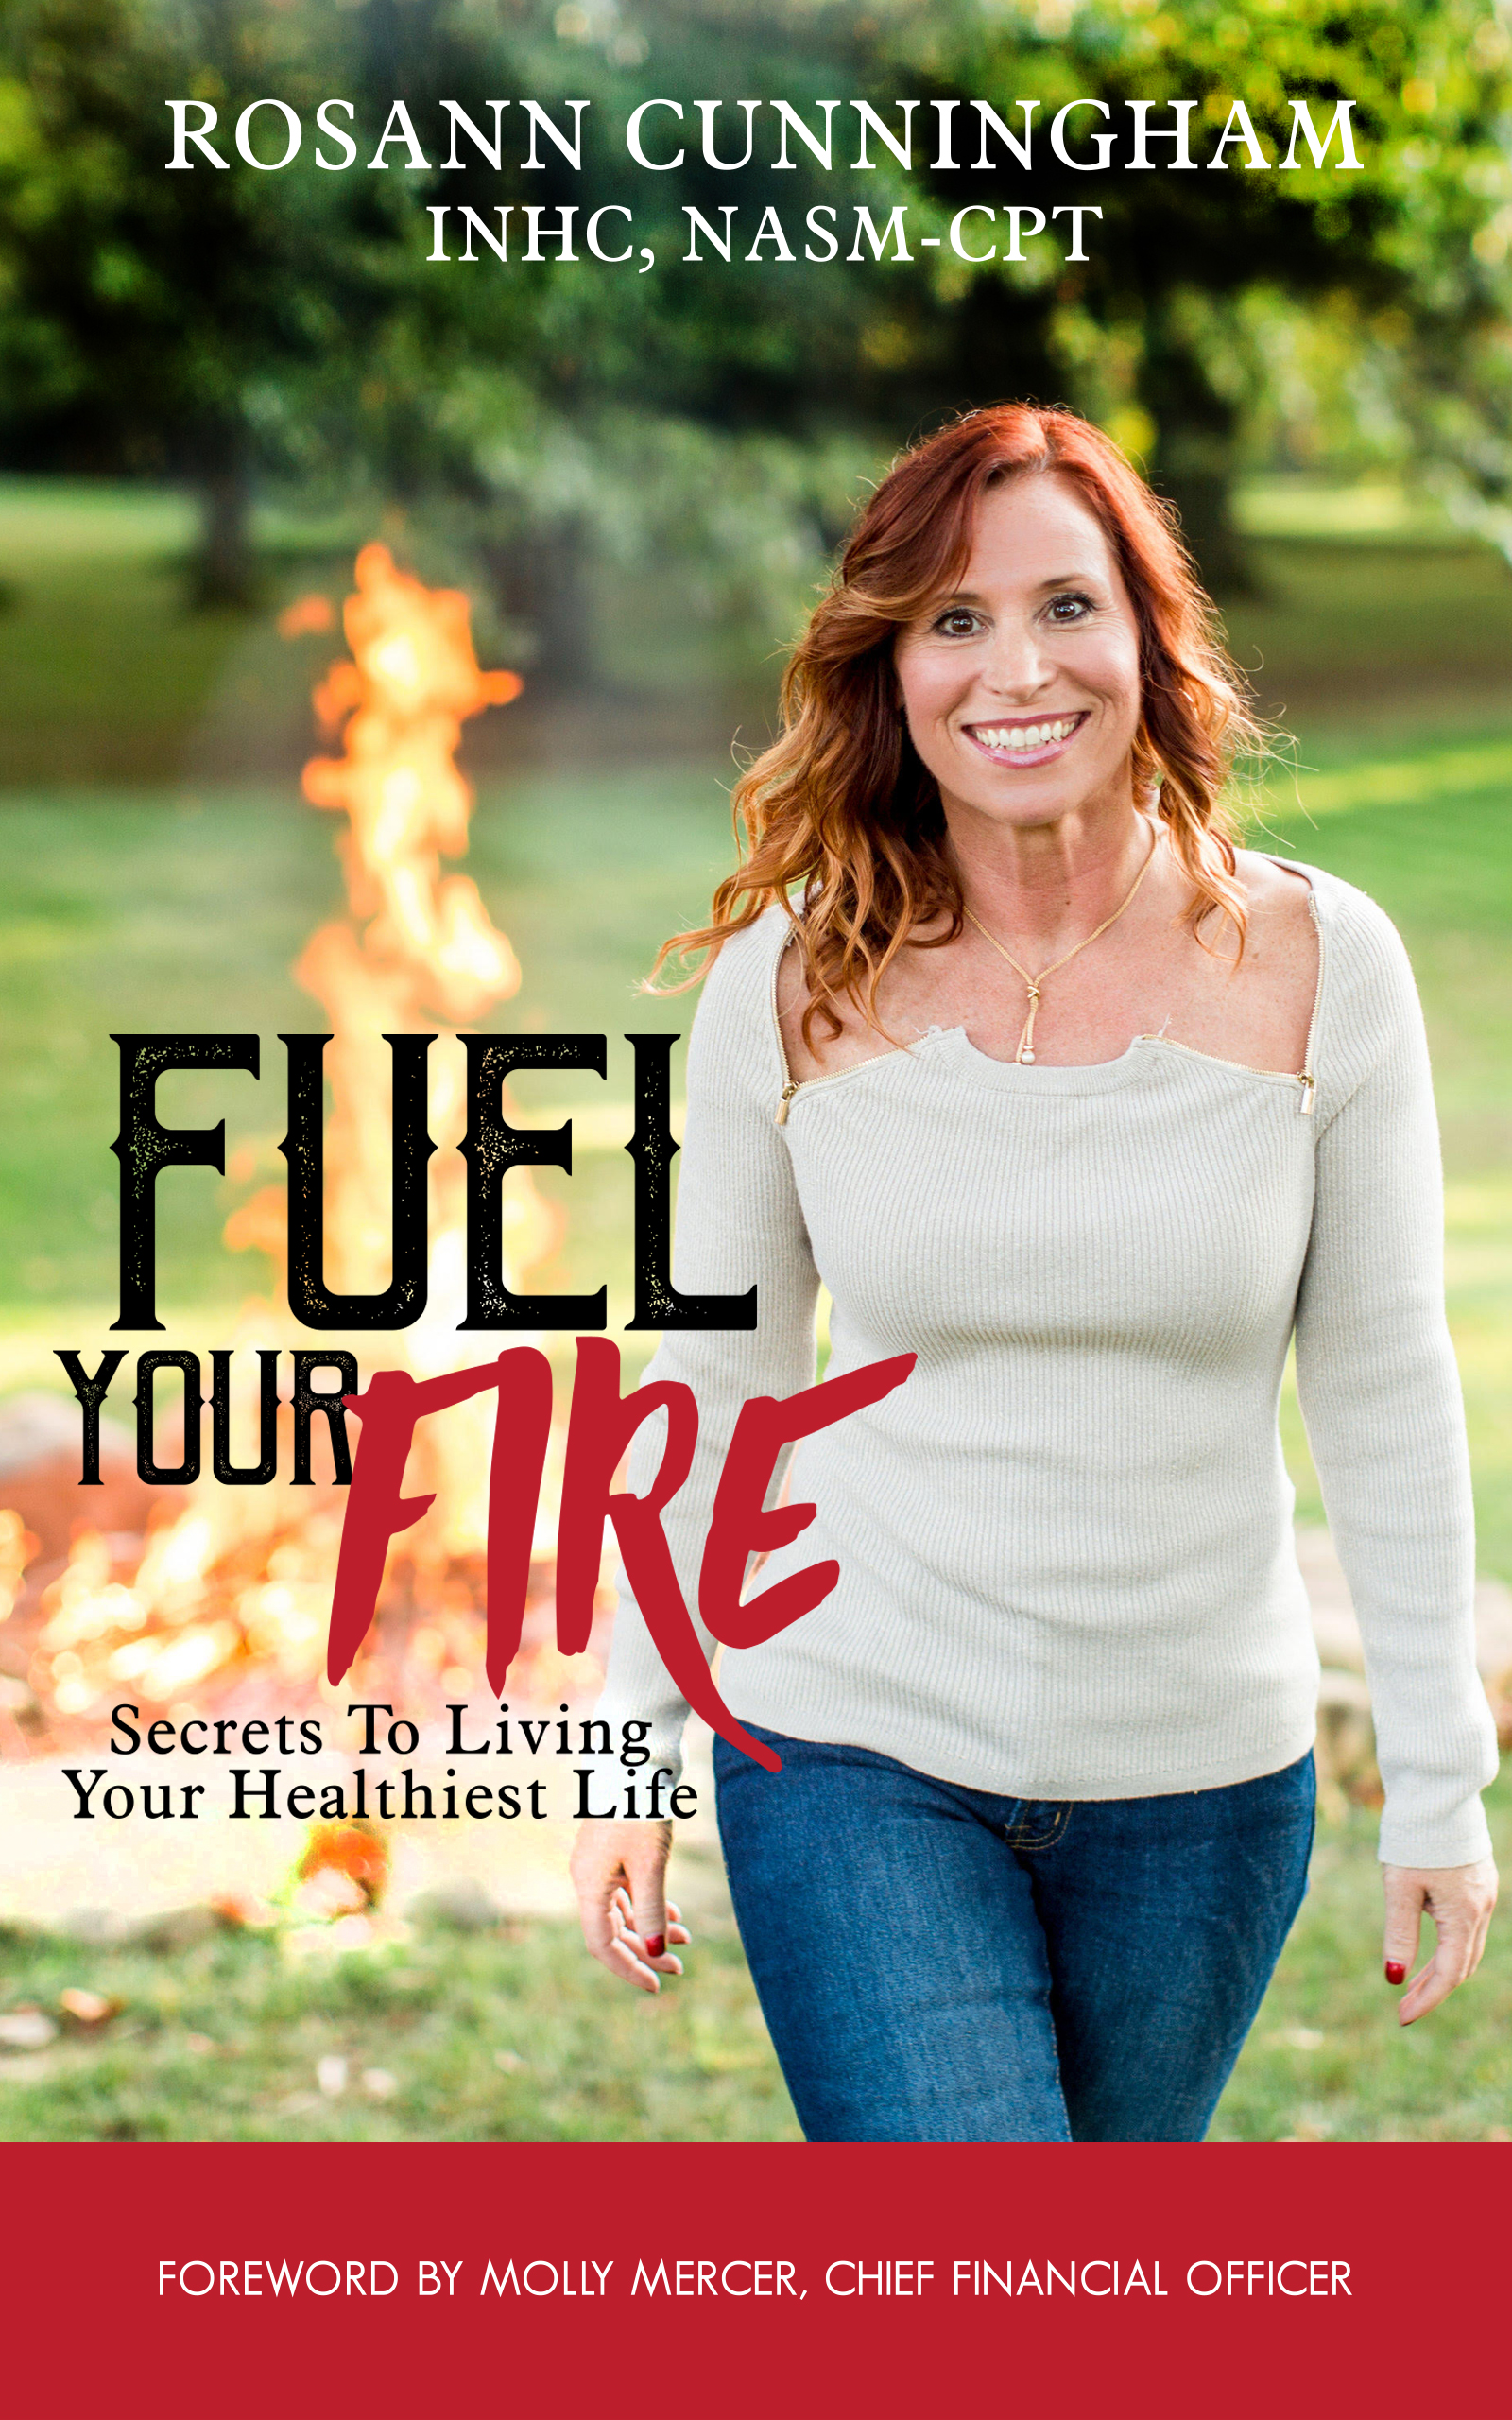 Rosann Cunningham LLC Announces the Release of Health & Wellness Book, Fuel Your Fire: Secrets to Living Your Healthiest Life